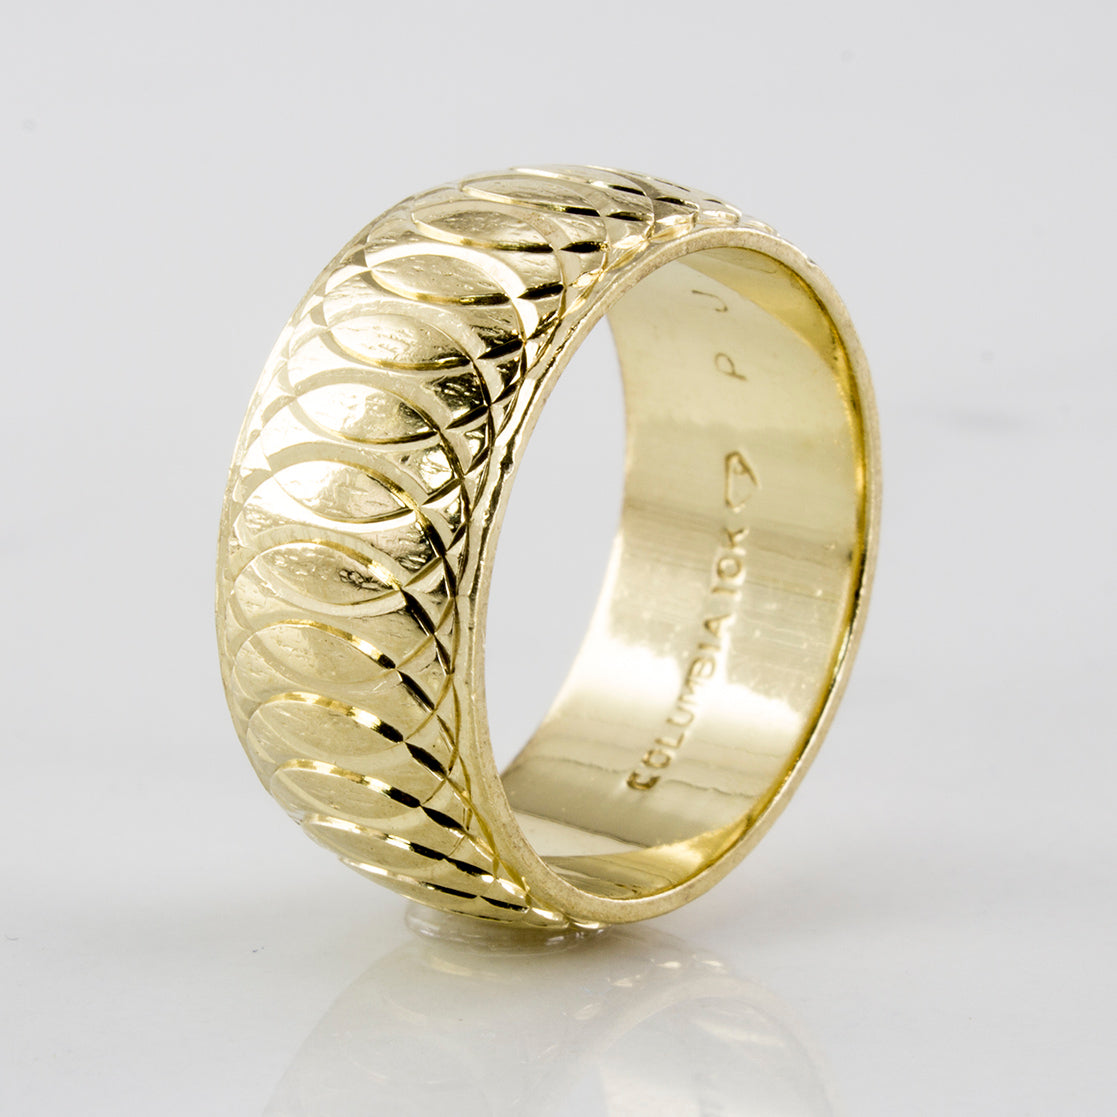 Engraved Patterned Wide Gold Band | SZ 5.25 |